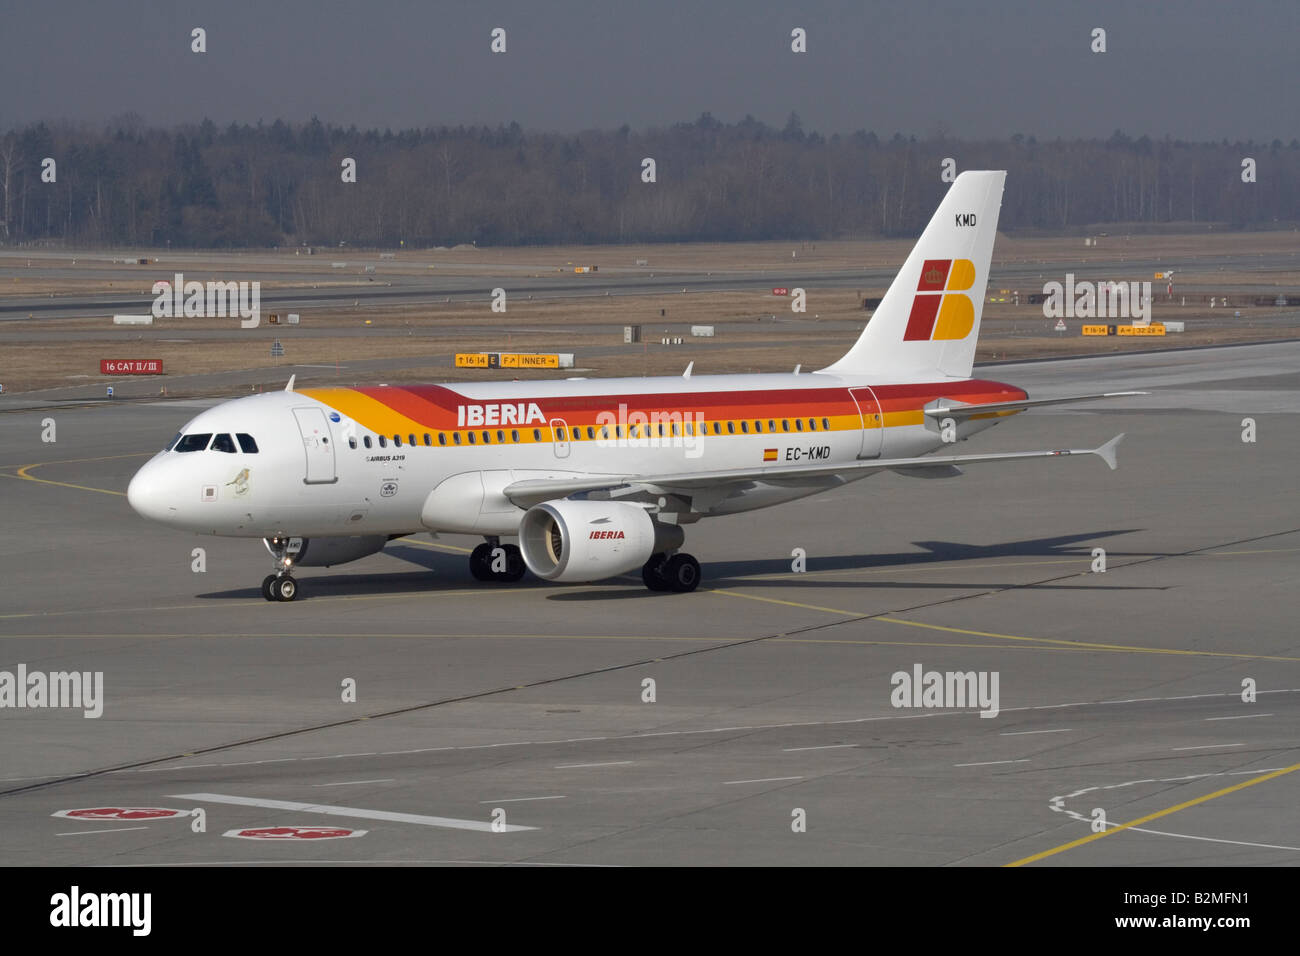 Iberia Airbus A319 passenger jet plane taxiing on the ground at Zurich Airport Stock Photo